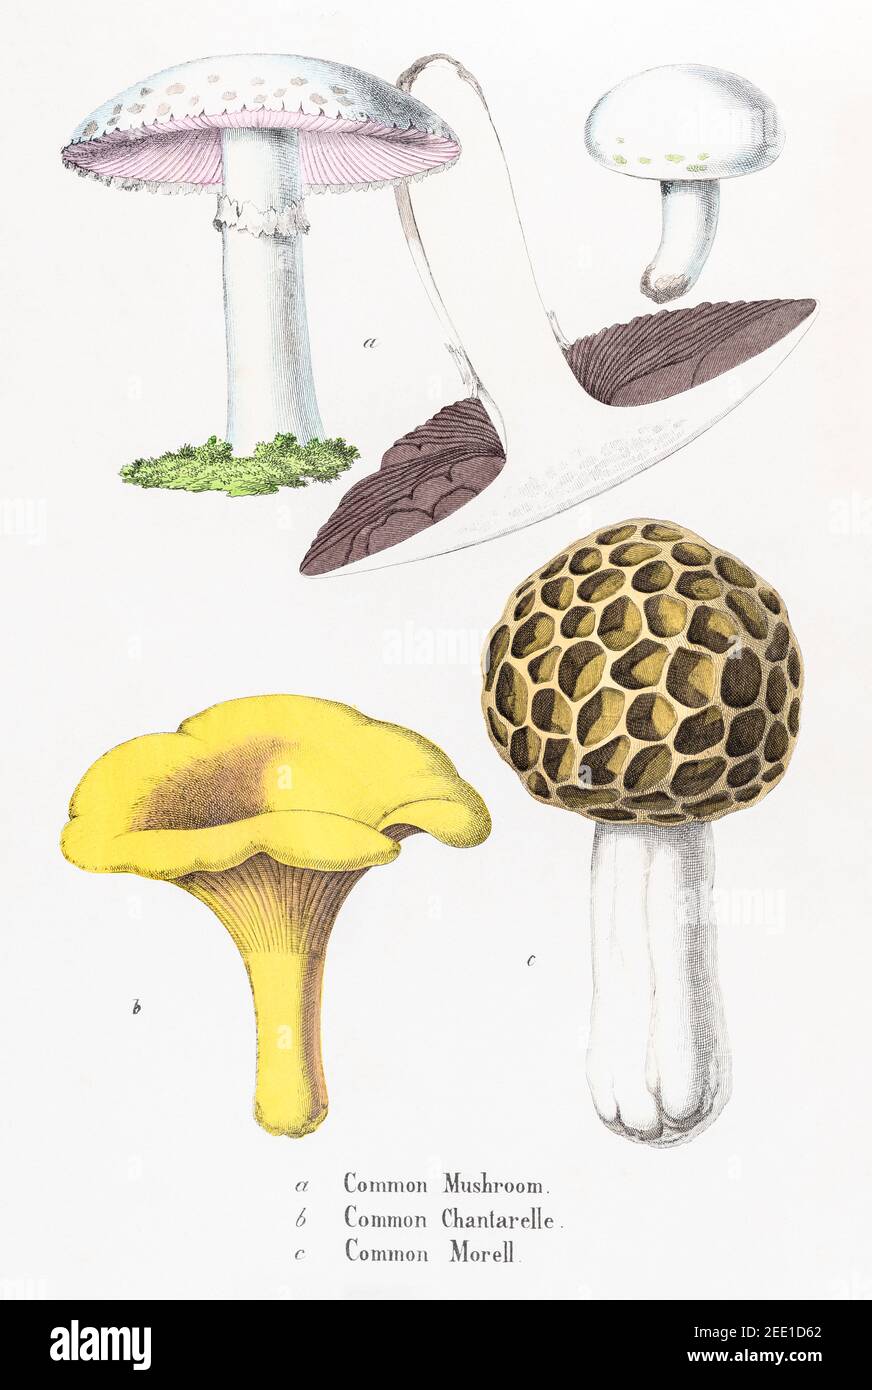 Digitally restored 19th century Victorian botanical illustration of Chanterelle, Mushroom, & Morel fungi. See notes for source and process info. Stock Photo